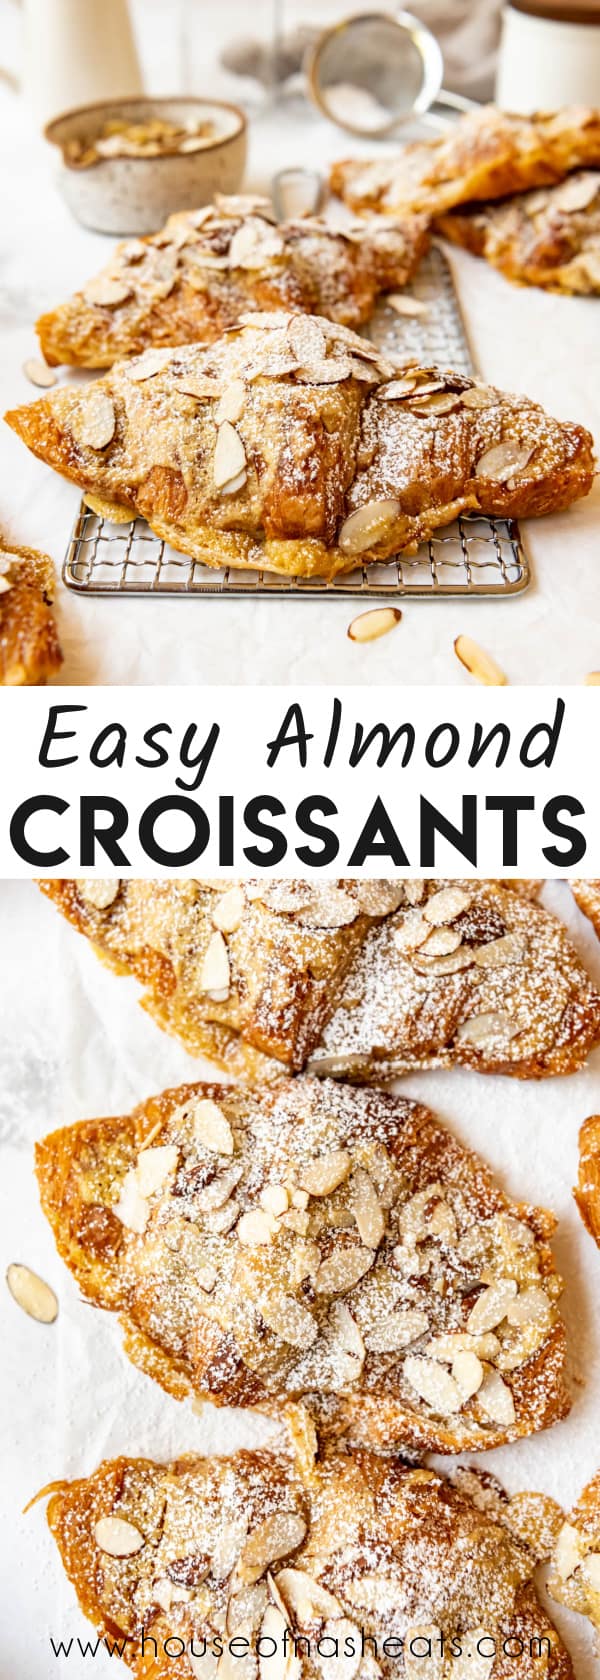 A collage of images of almond croissants with text overlay.